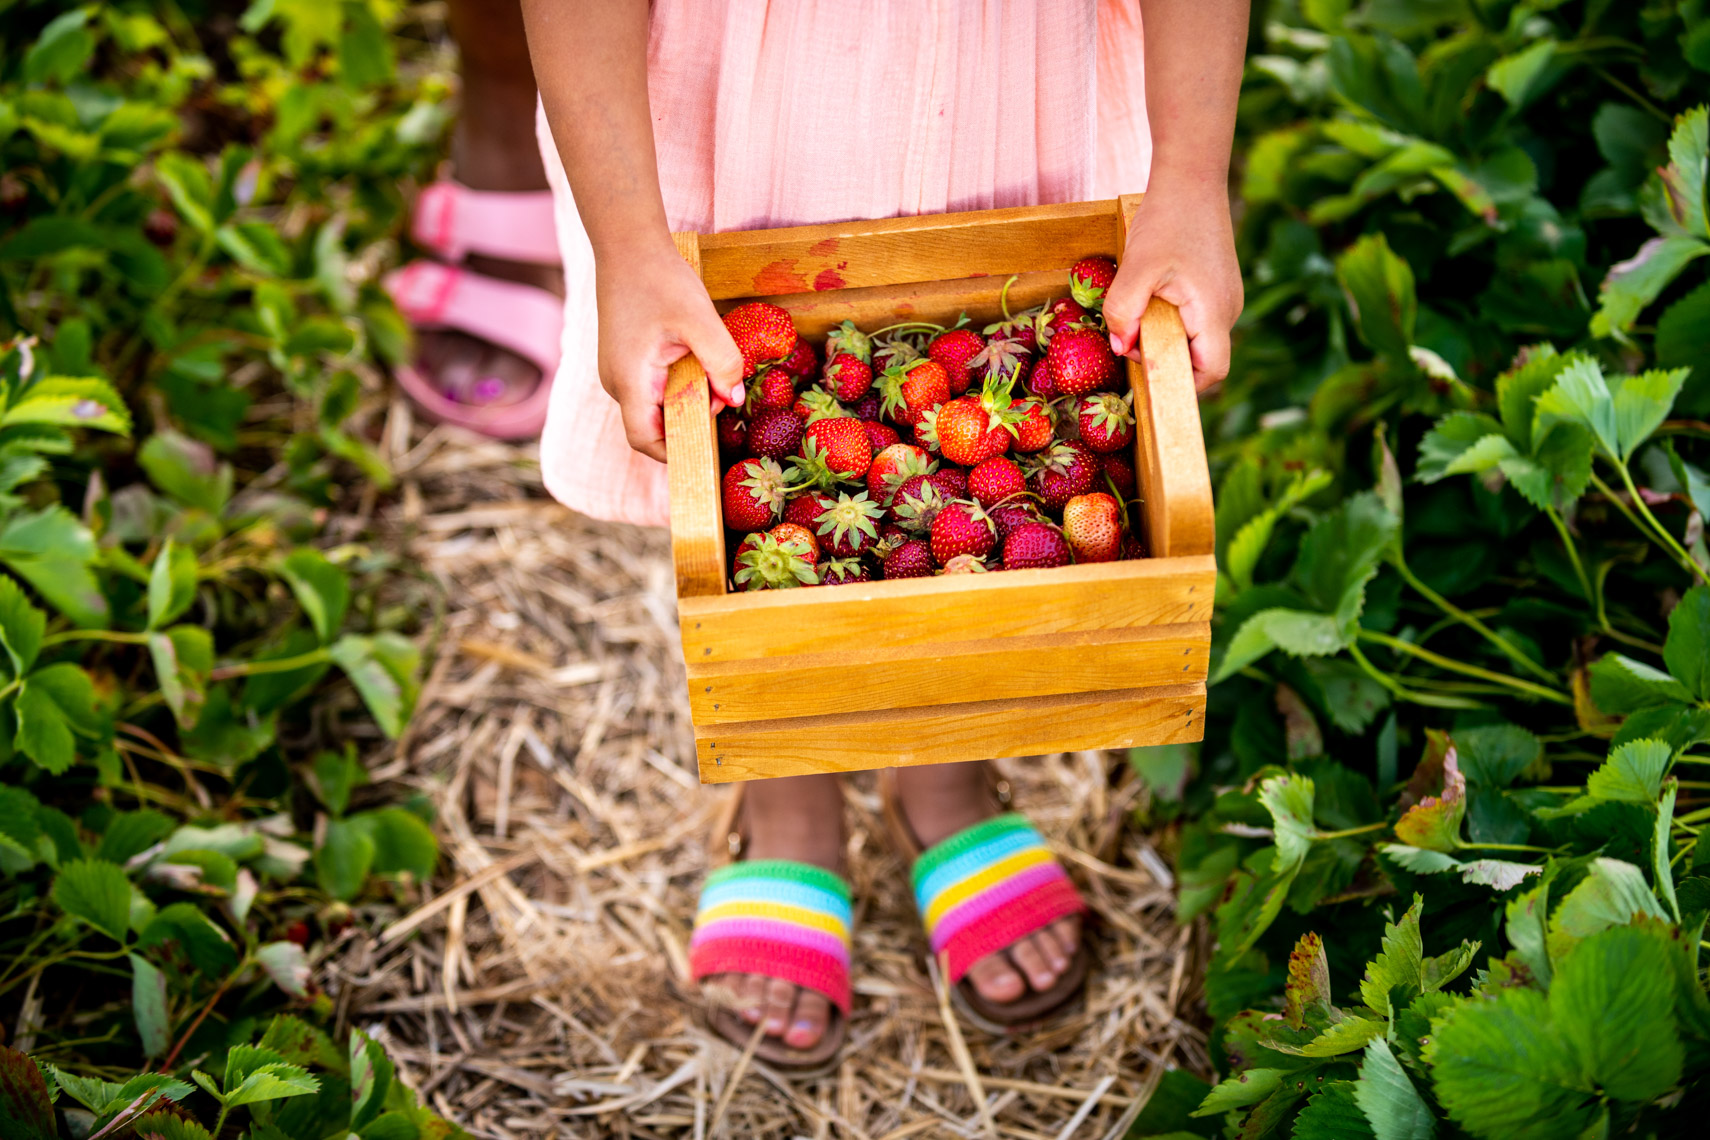 Laura-Chase-de-Formigny-Strawberry-Picking-14